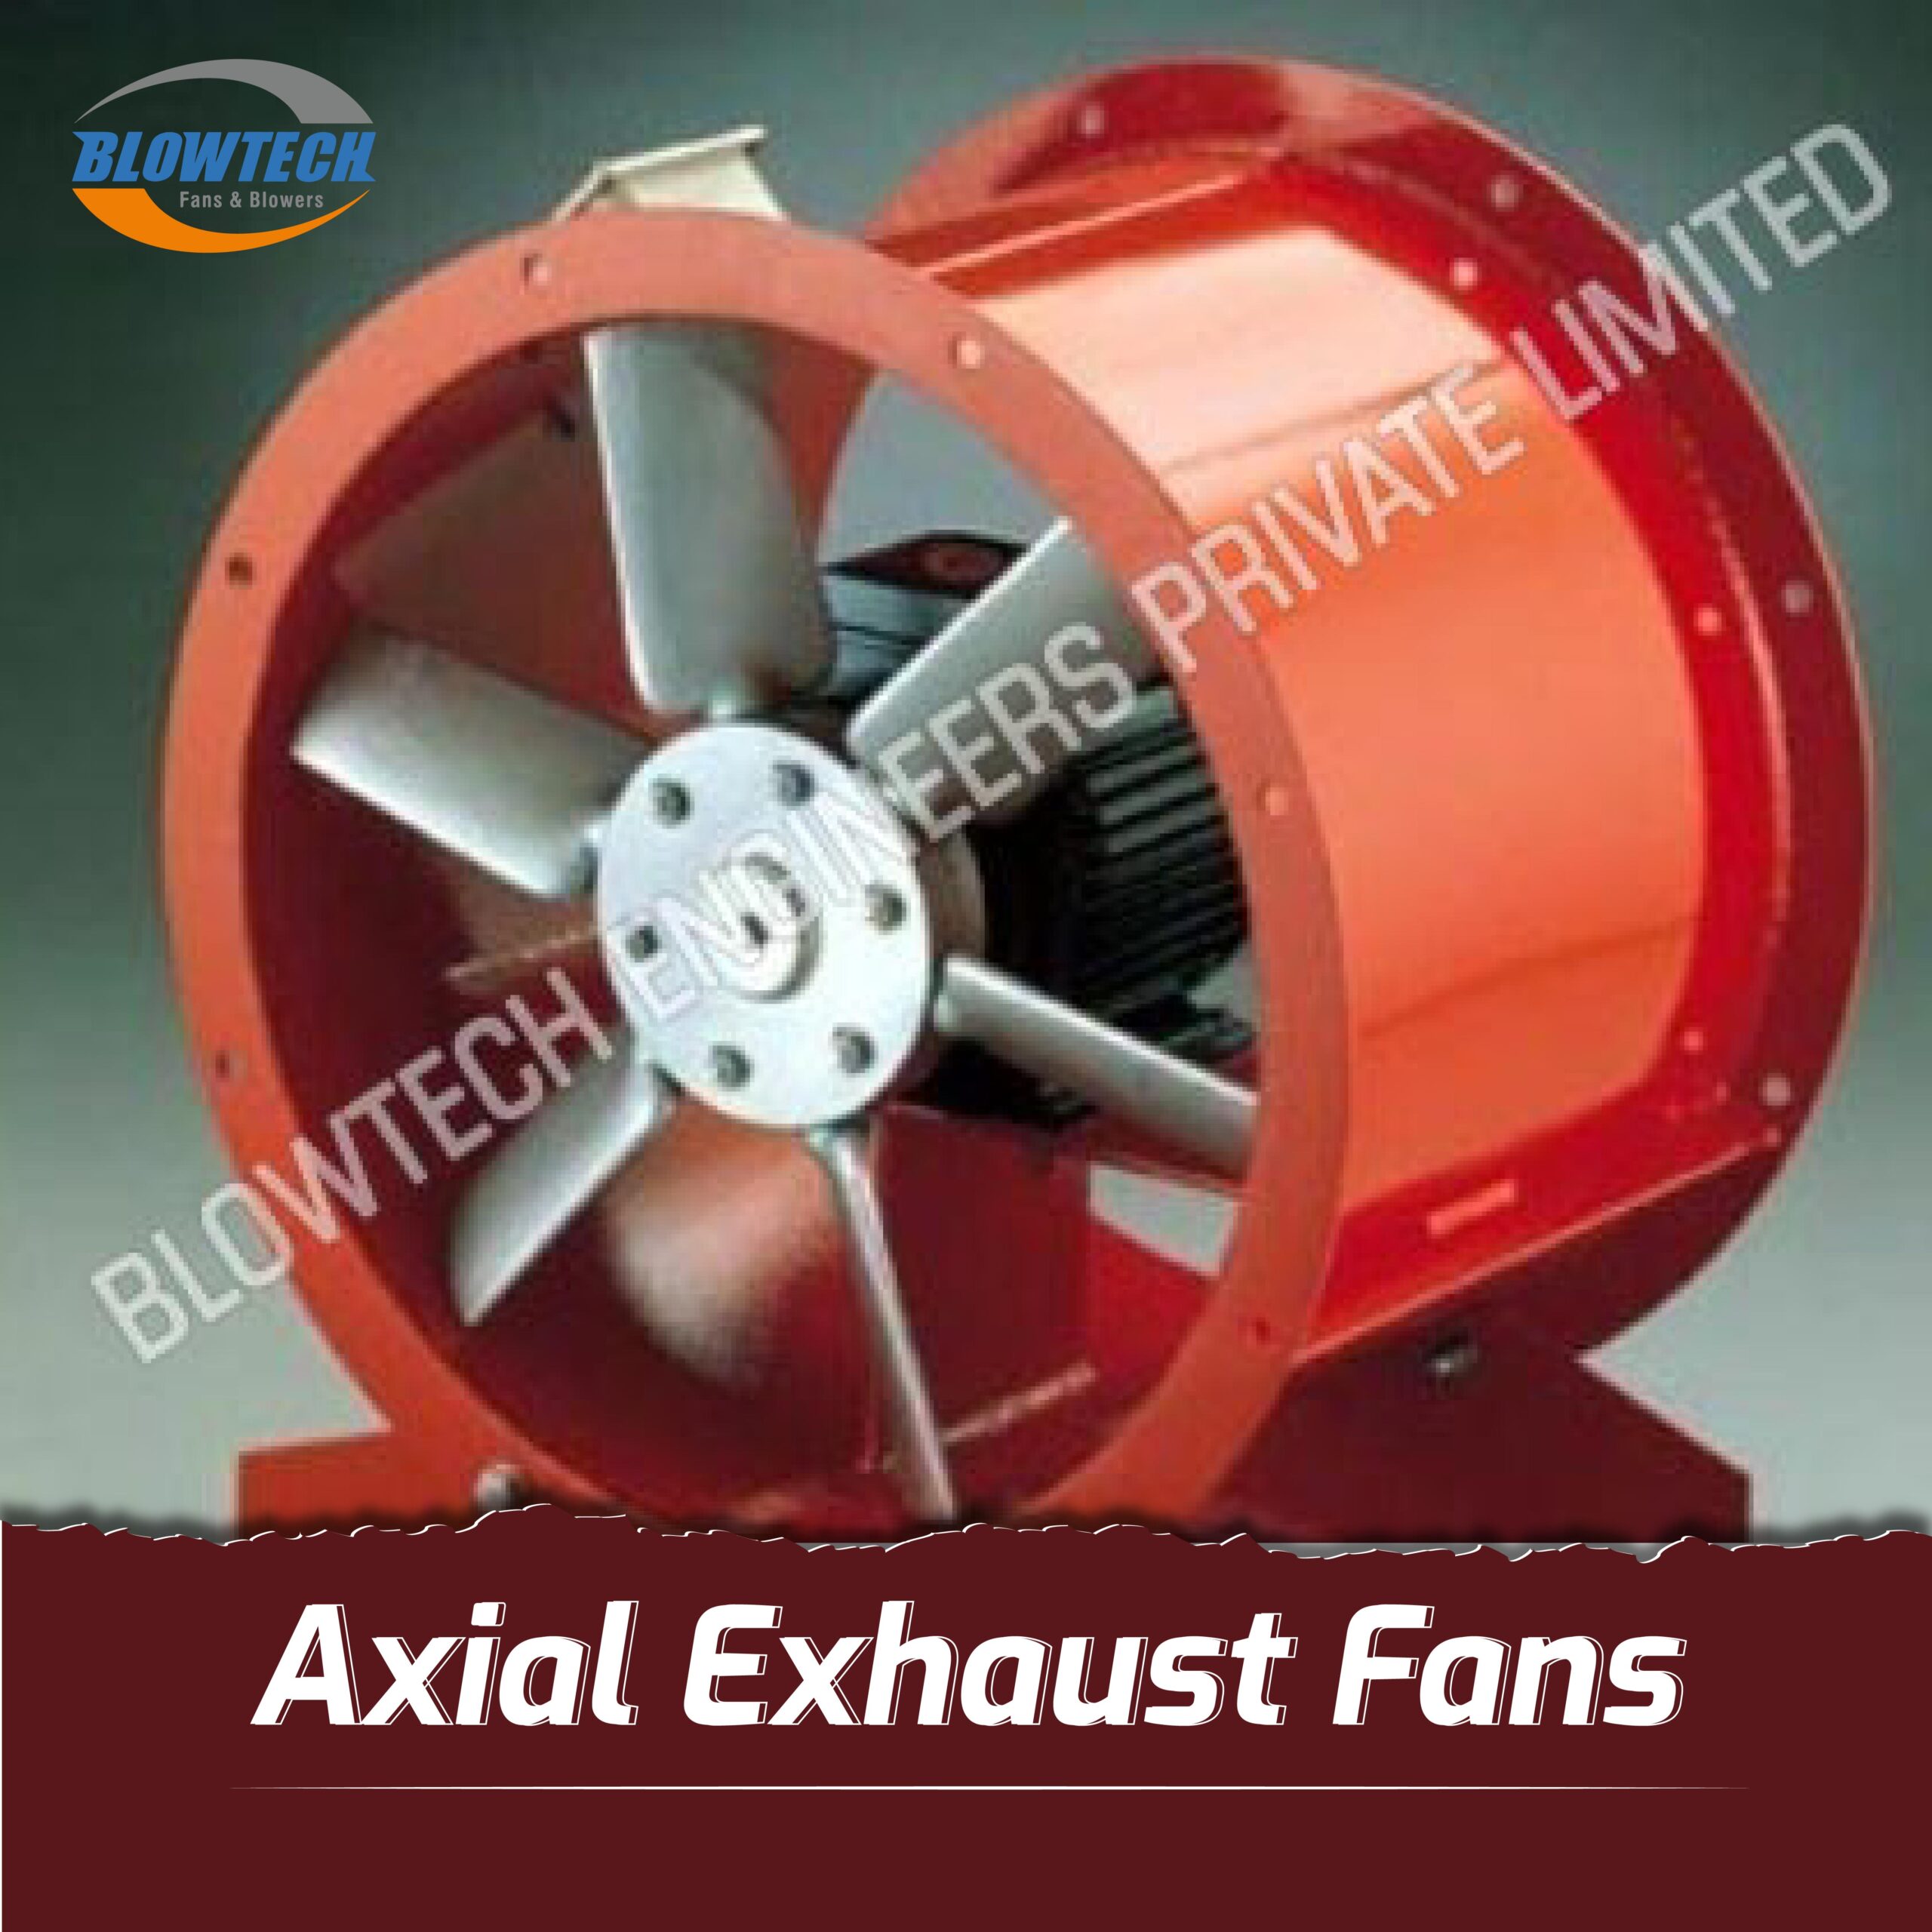 Axial Exhaust Fans  manufacturer, supplier and exporter in Mumbai, India